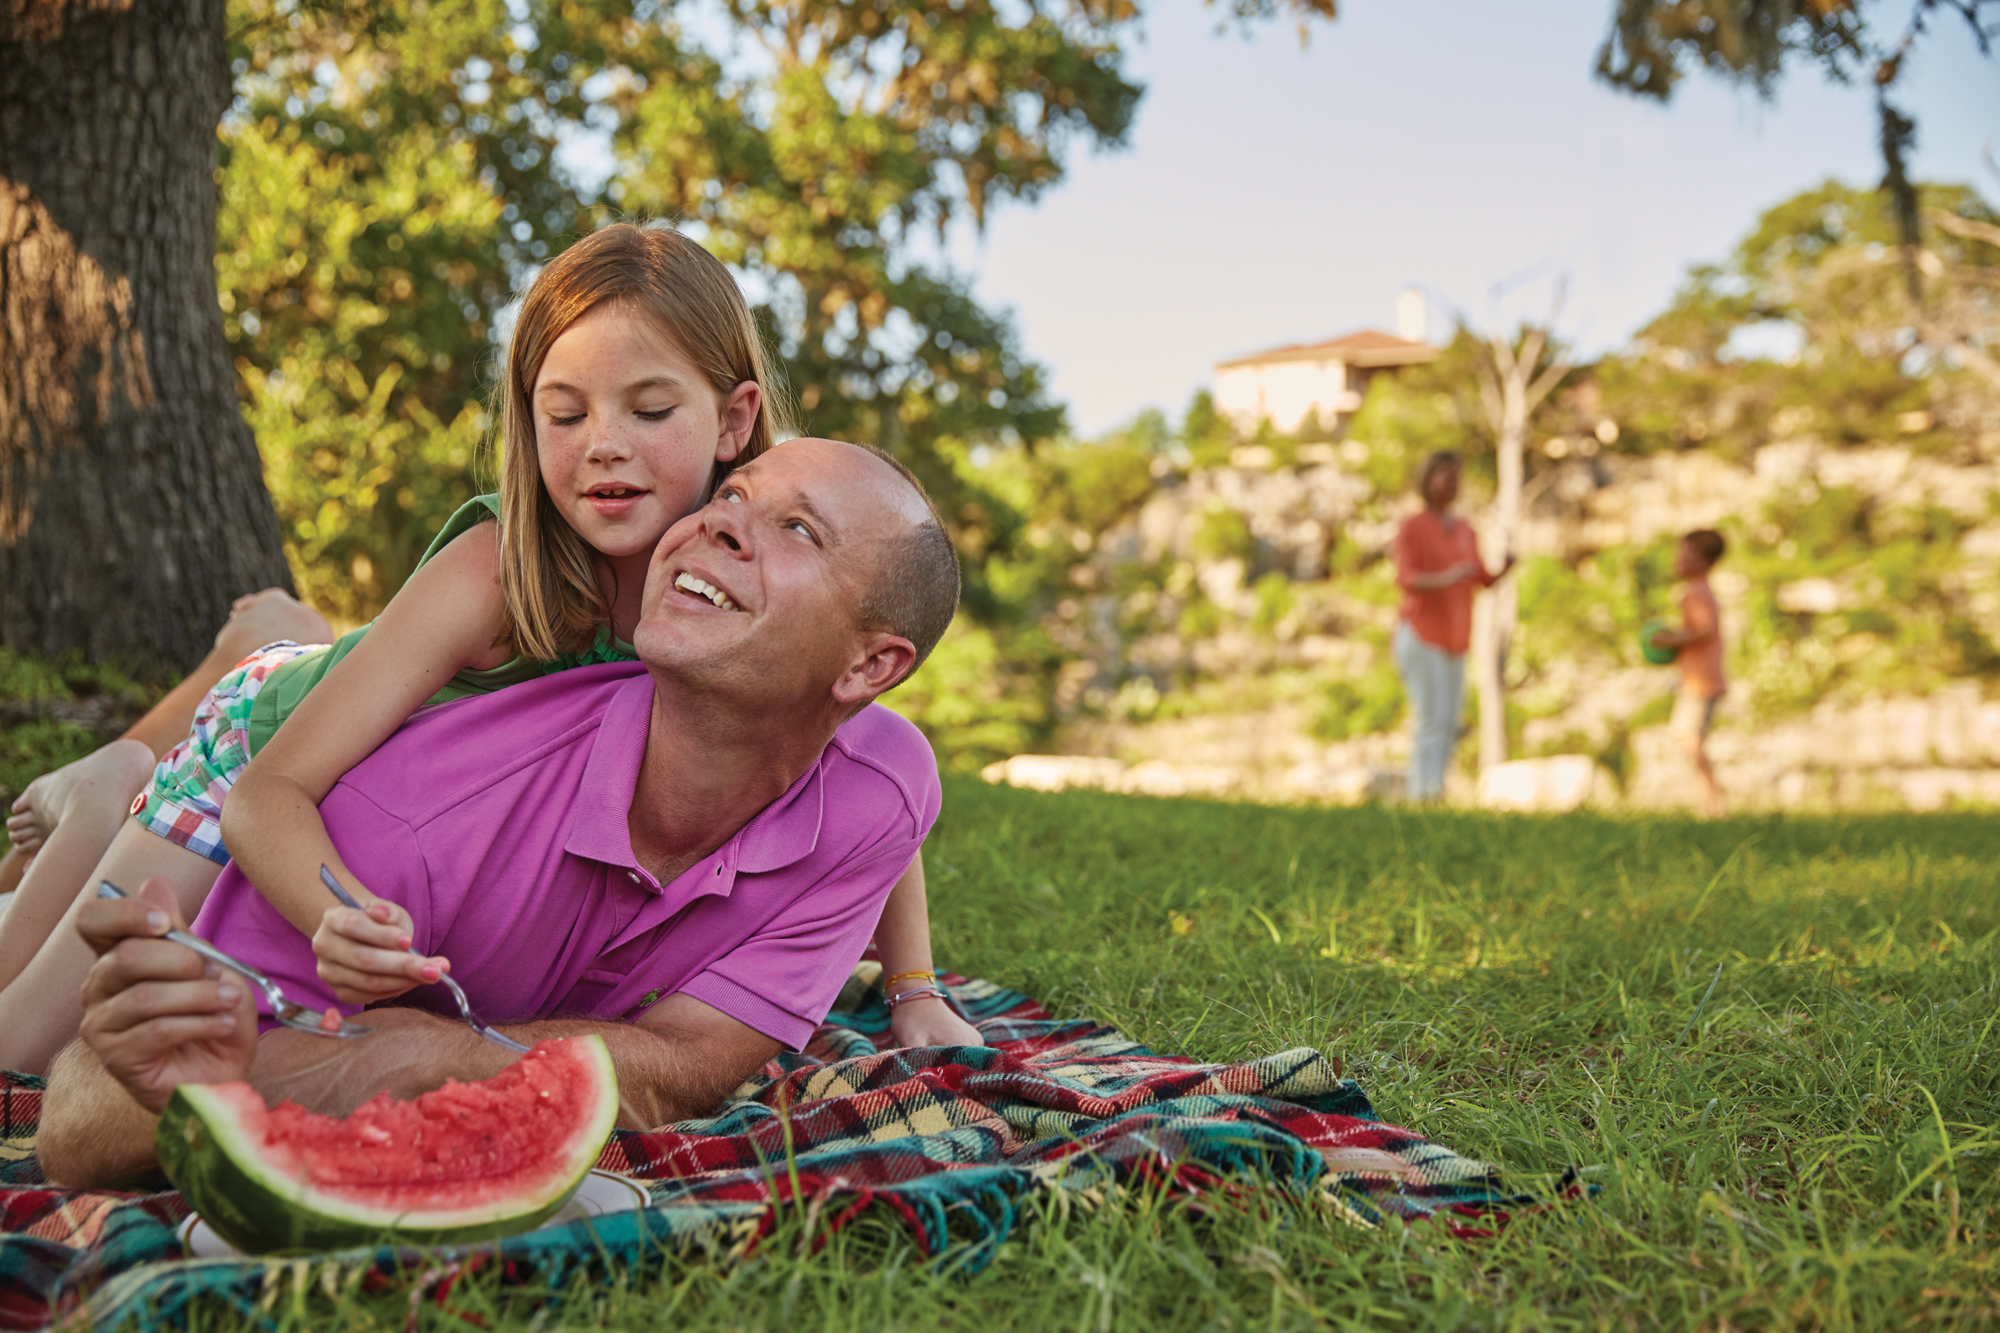 Swede_Park_Father_Daughter_Watermelon